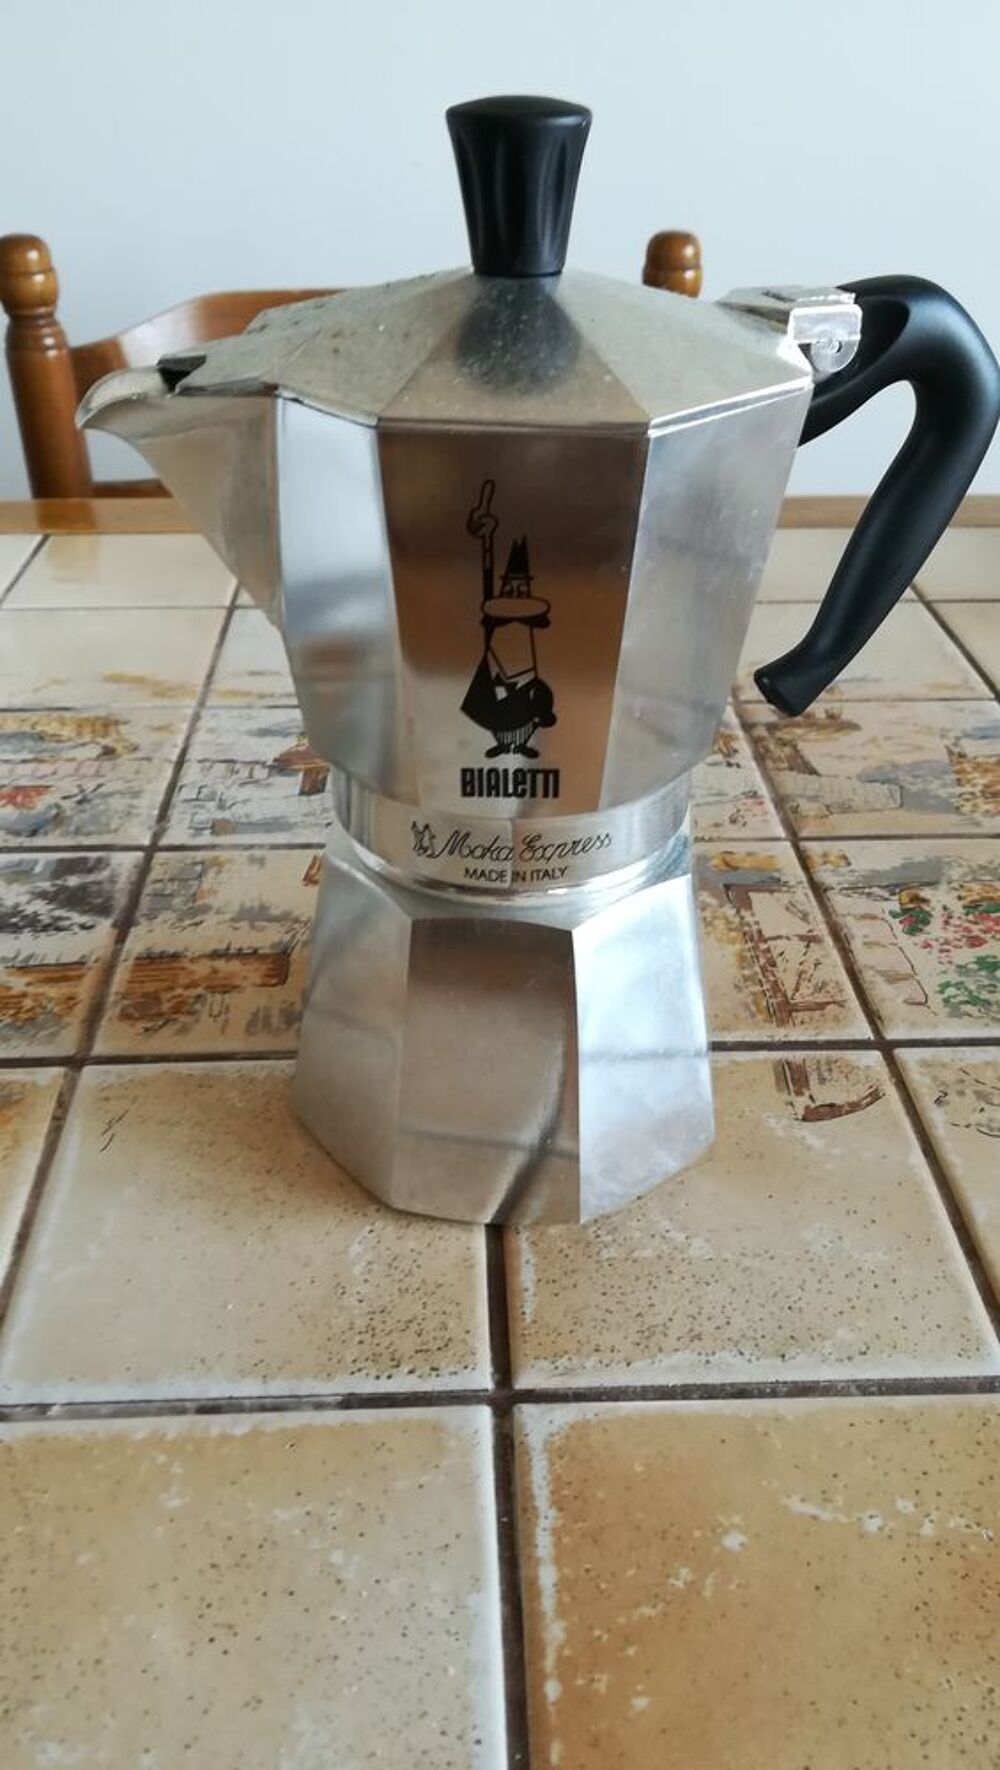 CAFETIERE ITALIENNE Electromnager